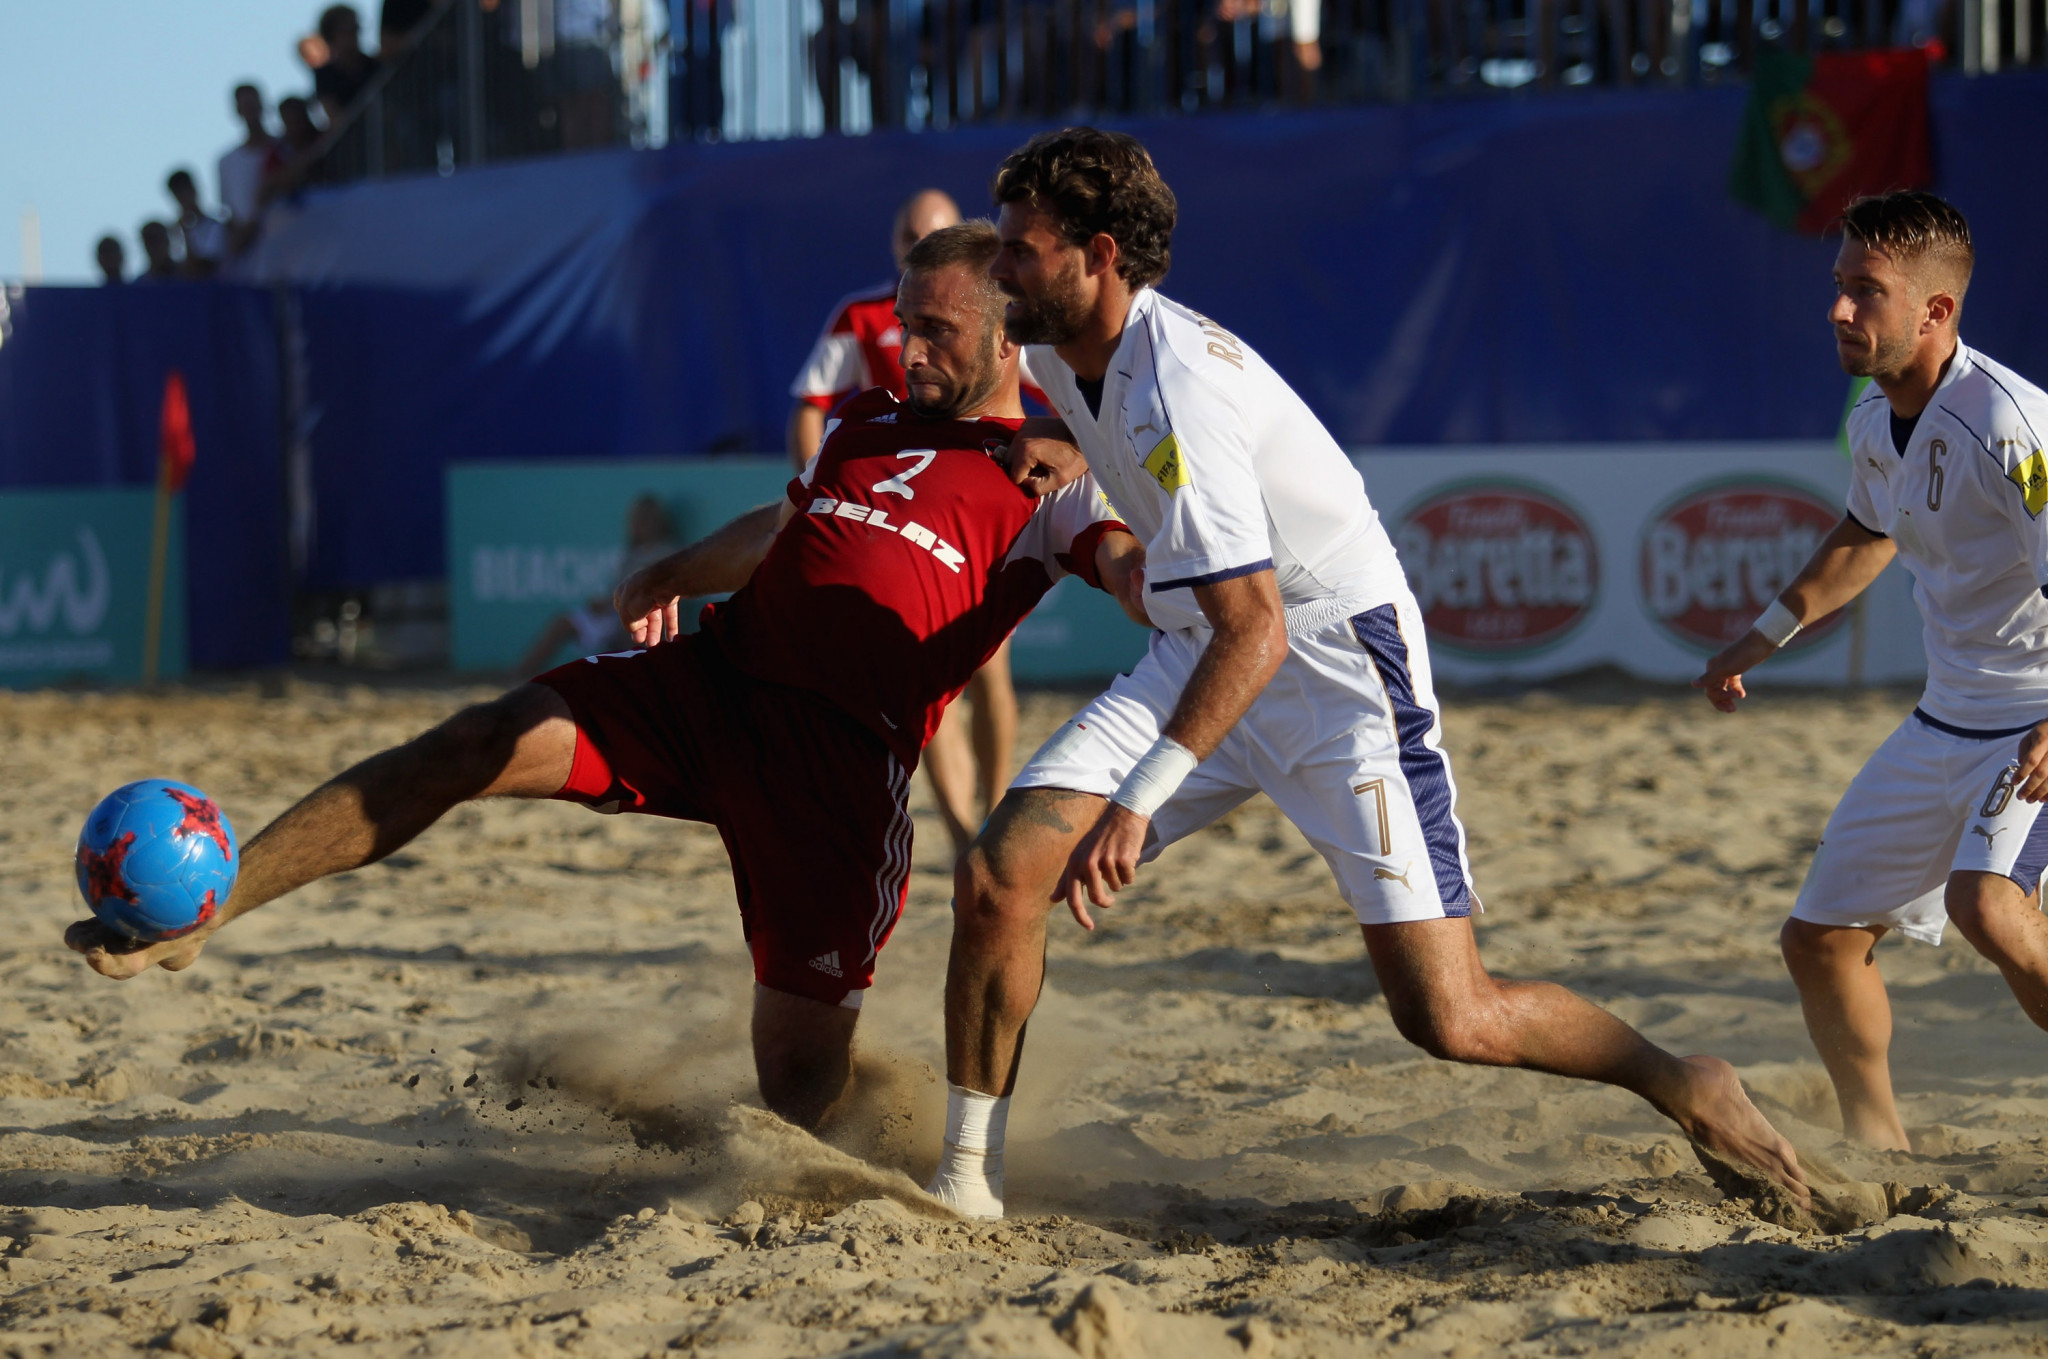 Hosts Belarus and Italy will both compete in the beach soccer competition at Minsk 2019 ©Getty Images